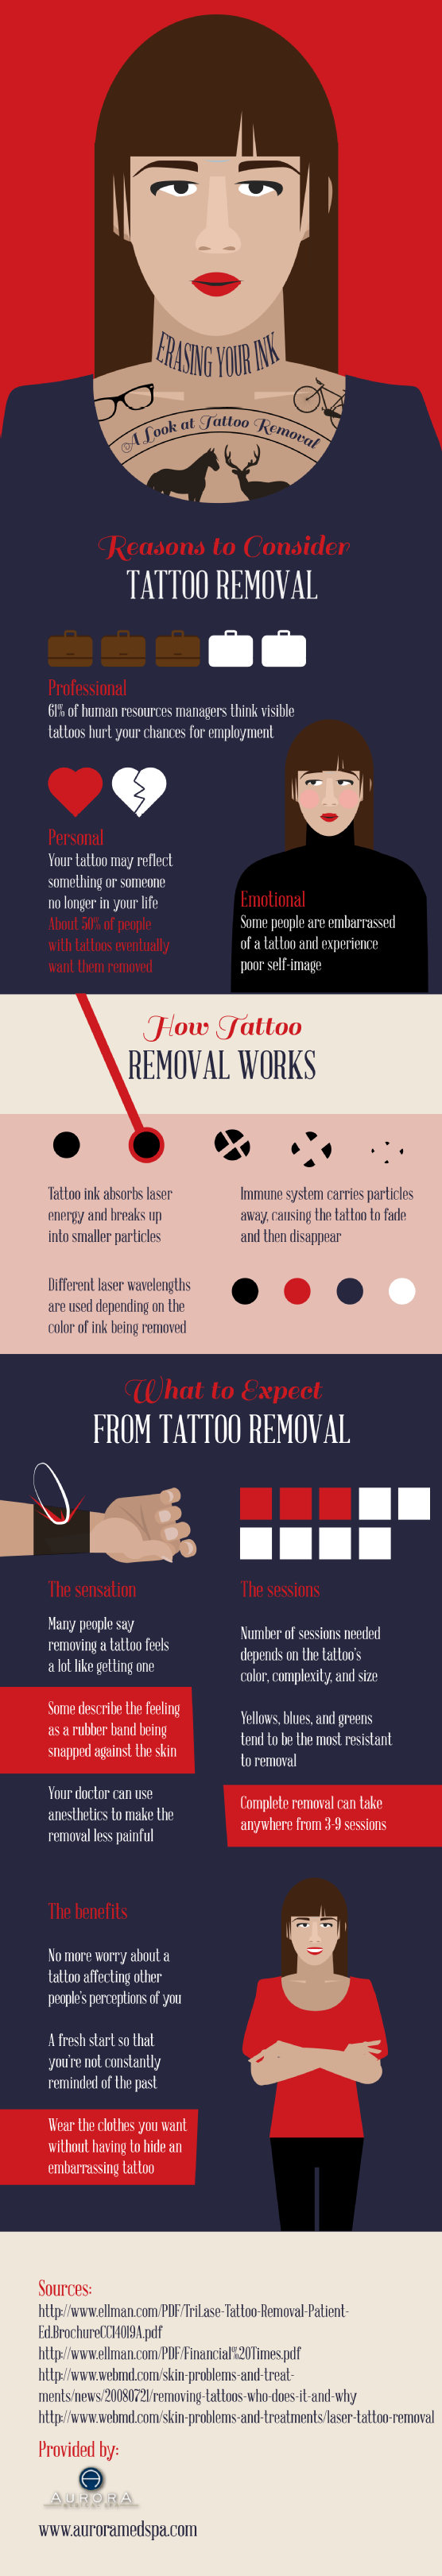 Vanishing Point Tattoo Removal  St Louis MO